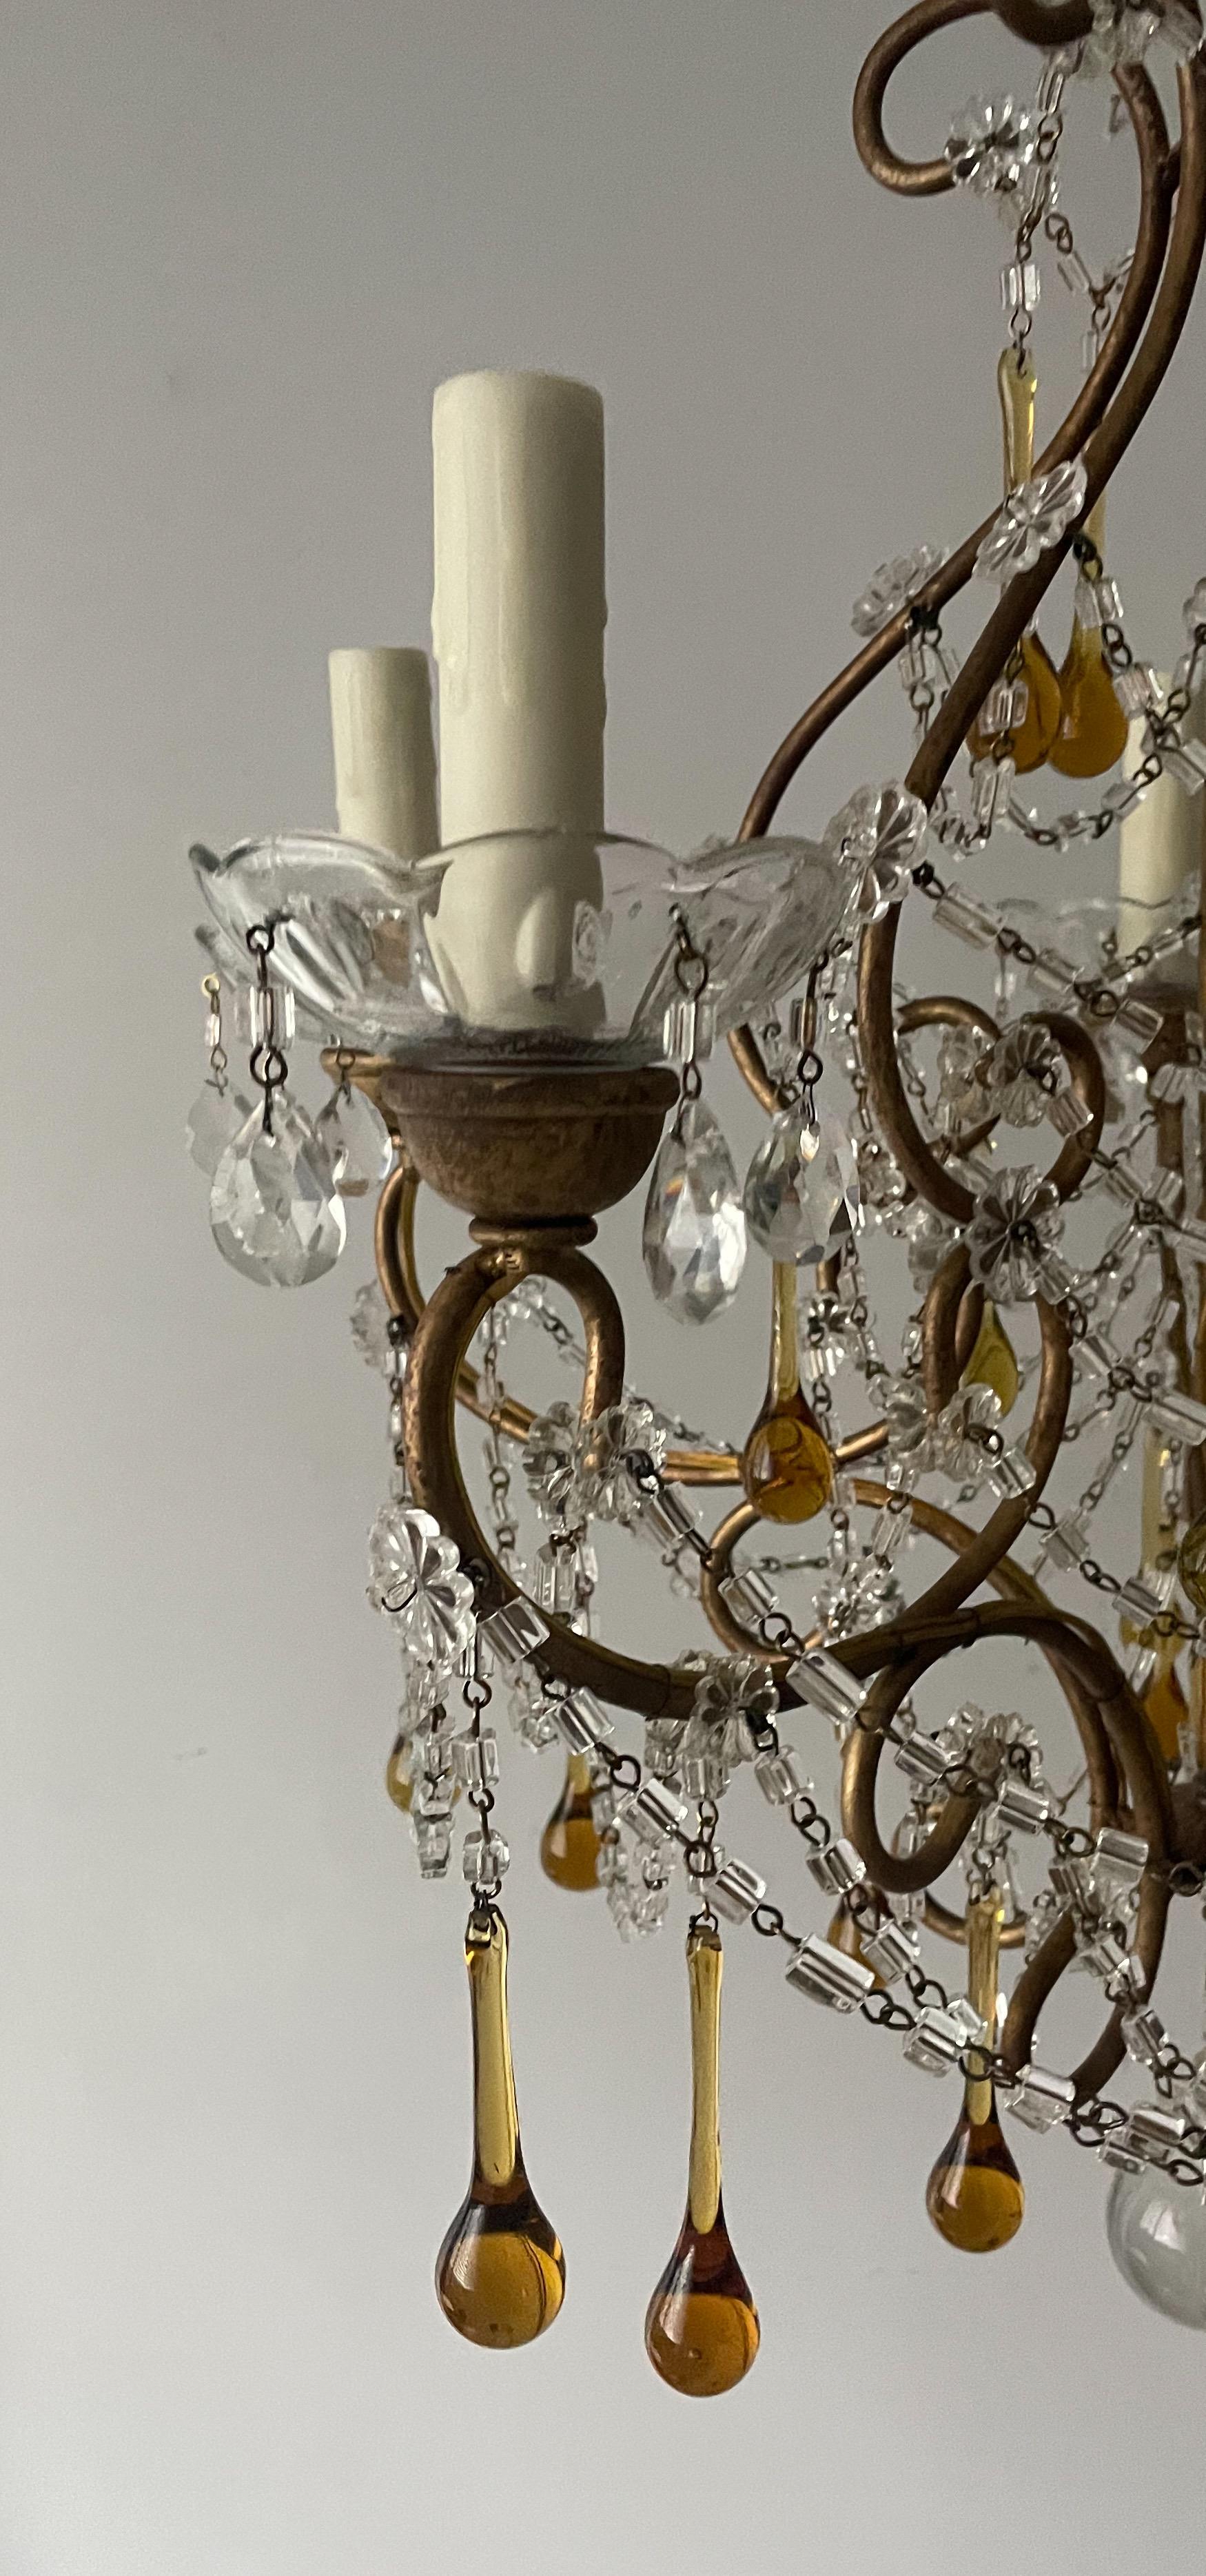 Mid-20th Century Italian Crystal Beaded Chandelier With Amber Drops For Sale